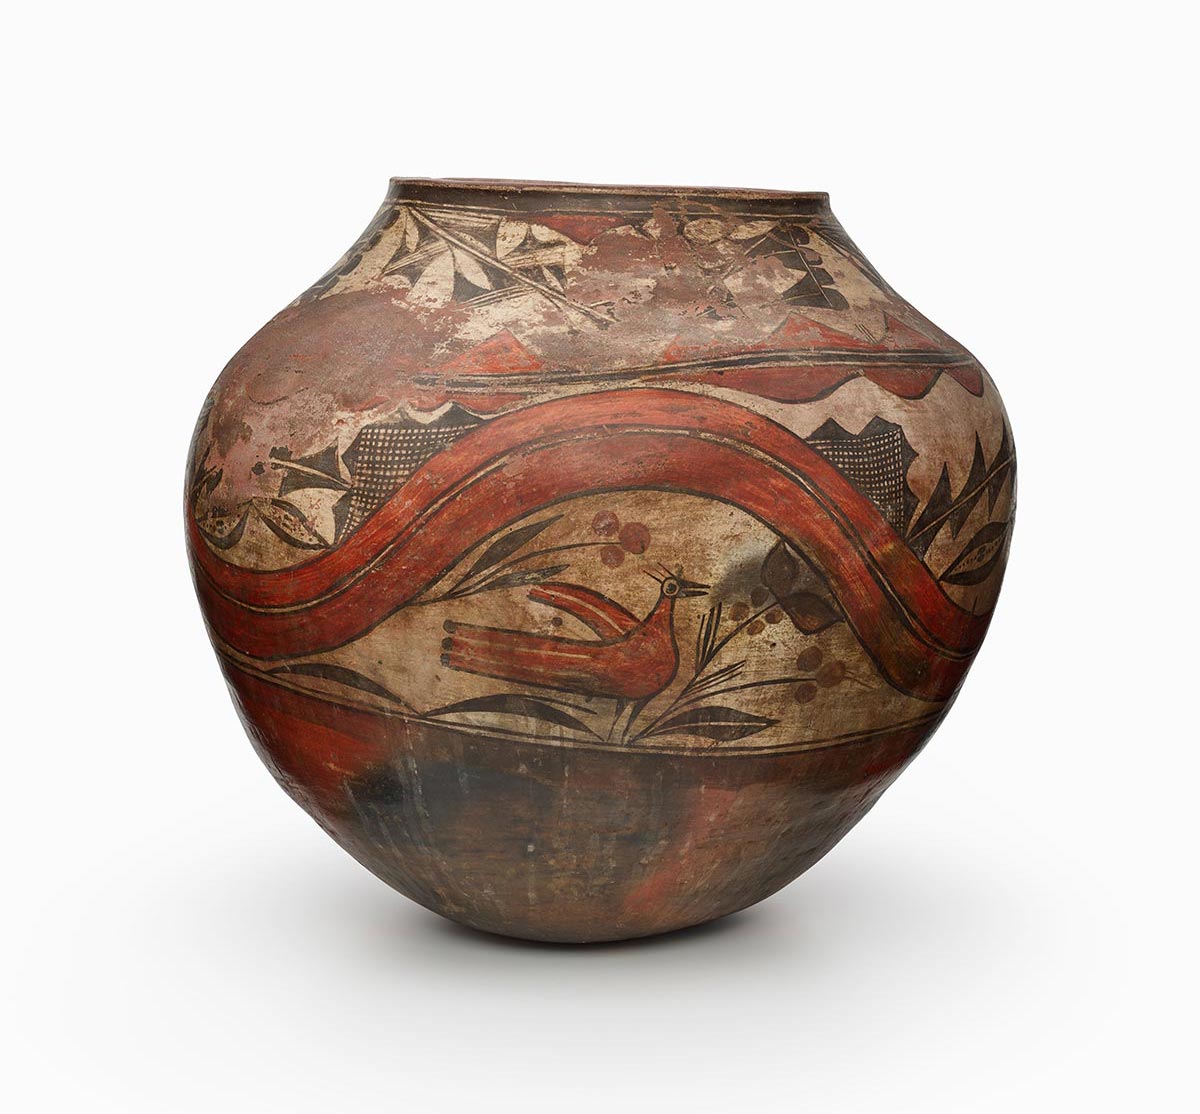 A Zia jar decorated with two bands of designs, including birds, flowers, plants, and geometric shapes.